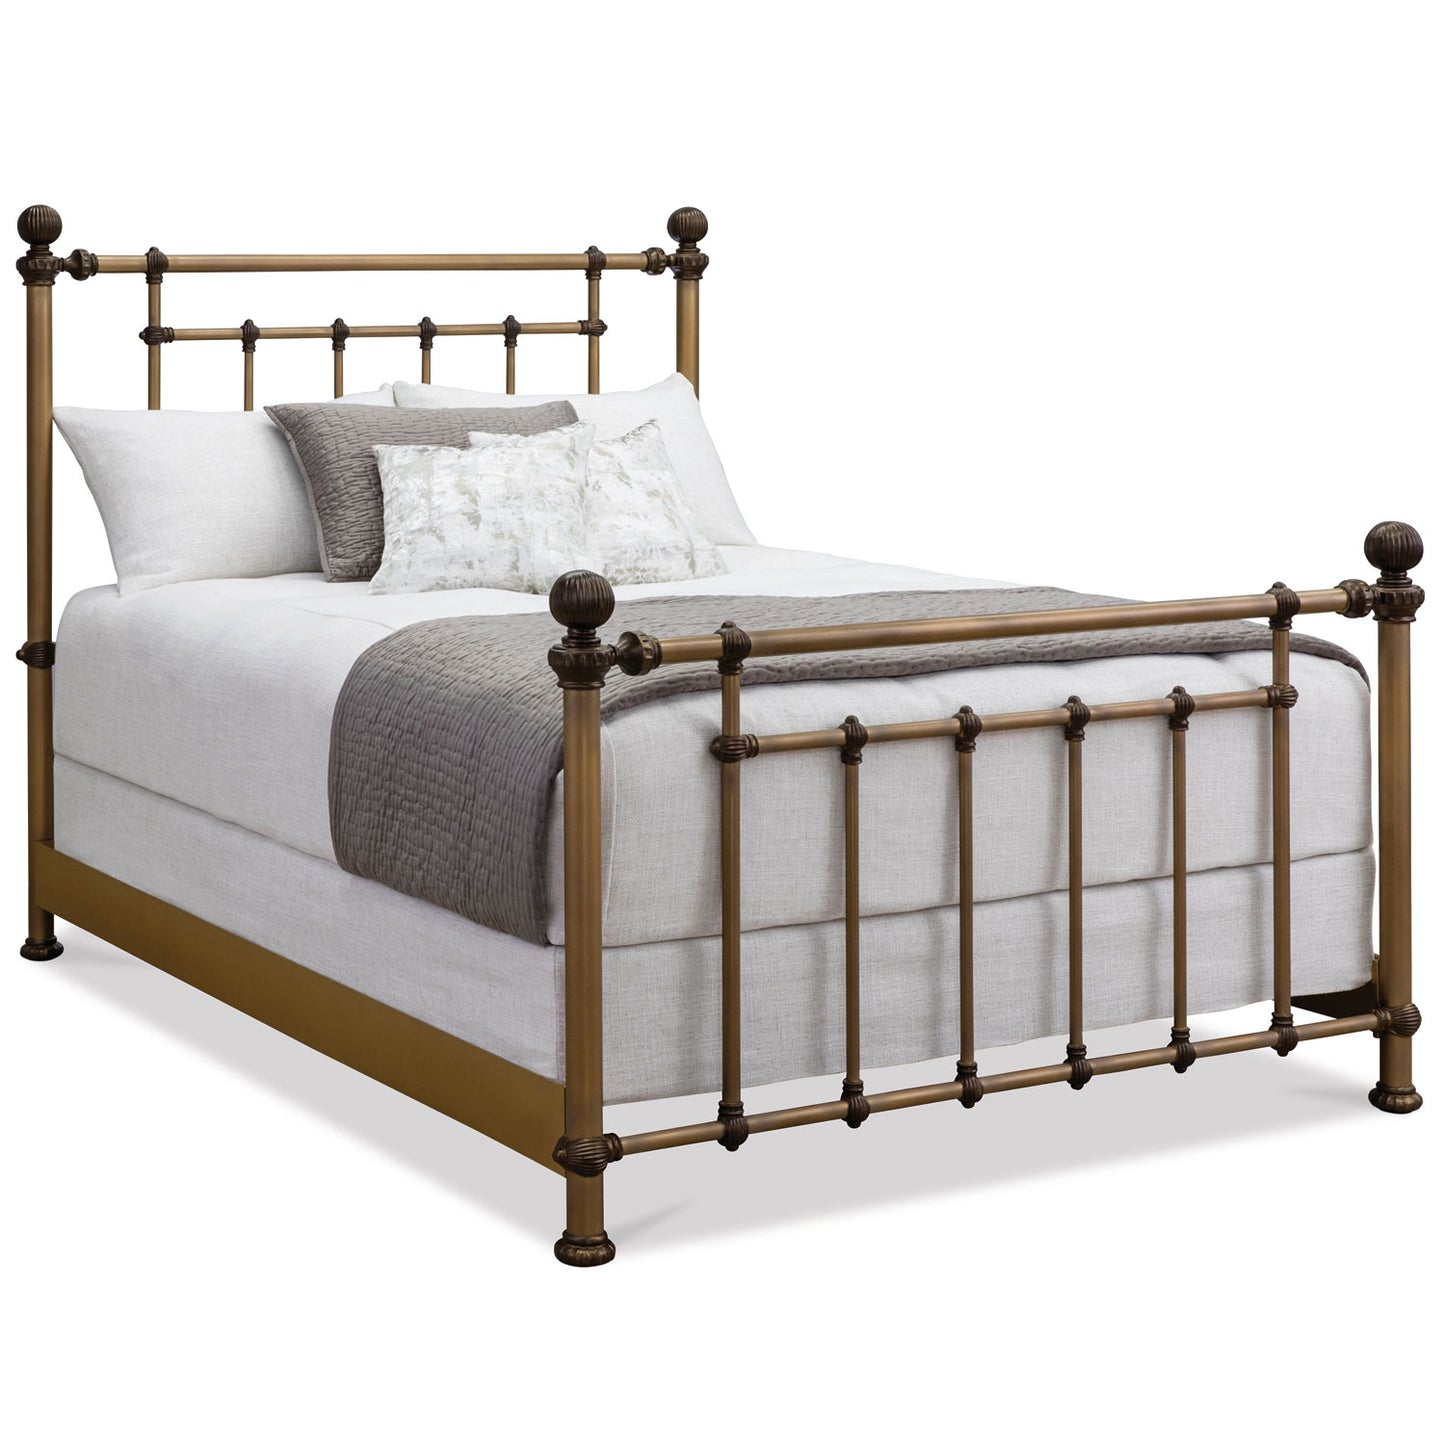 Revere Iron Bed 1315 Wesley Allen Queen CBMPF Aged Brass Finish Matriae